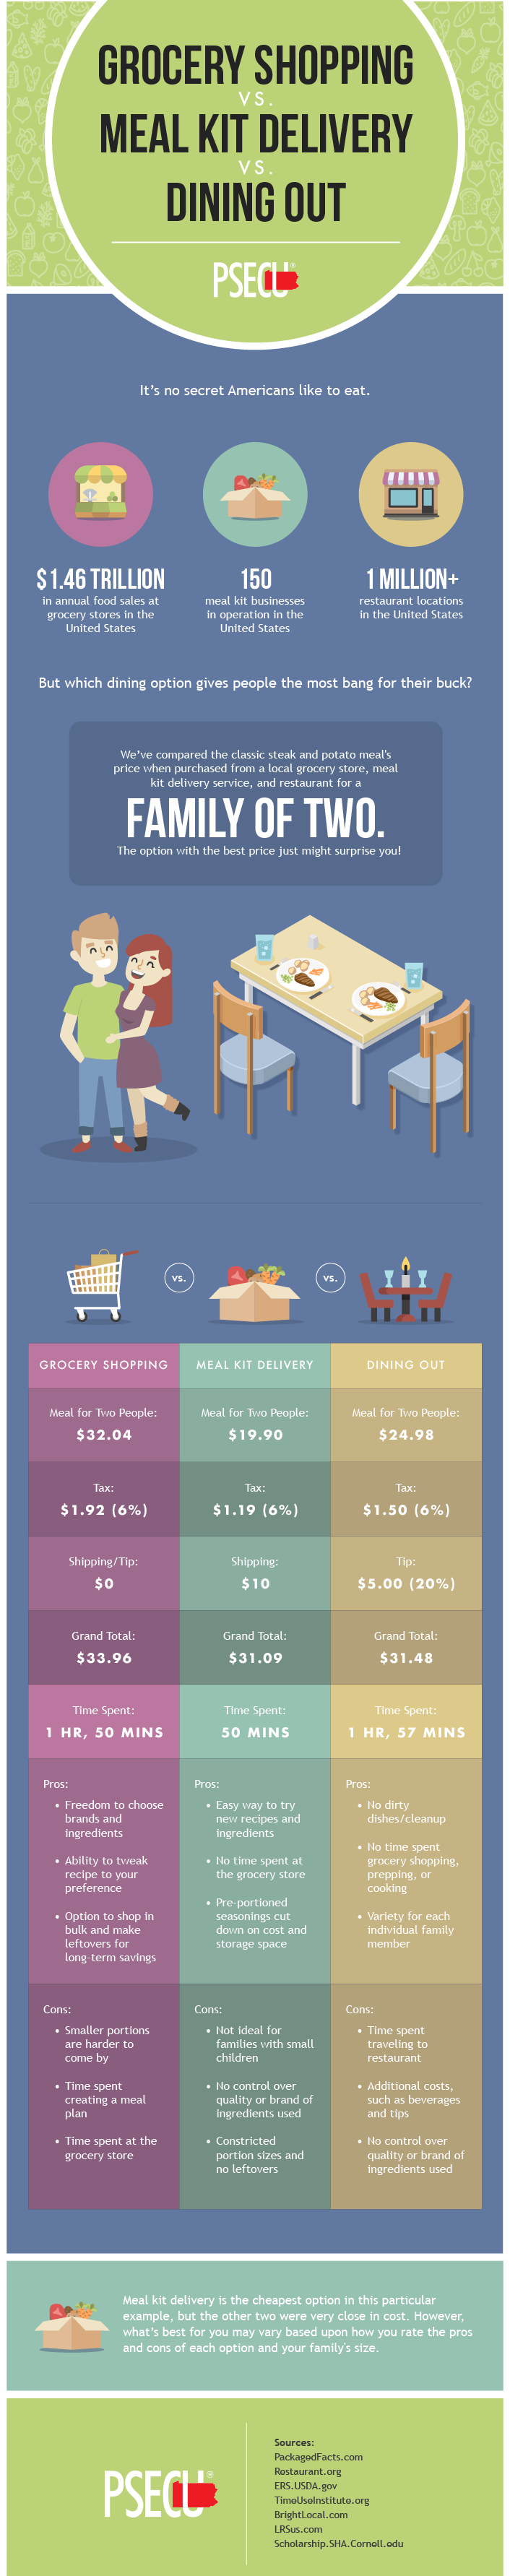 Which is Cheaper: Meal Kits vs Grocery Shopping vs Dining Out